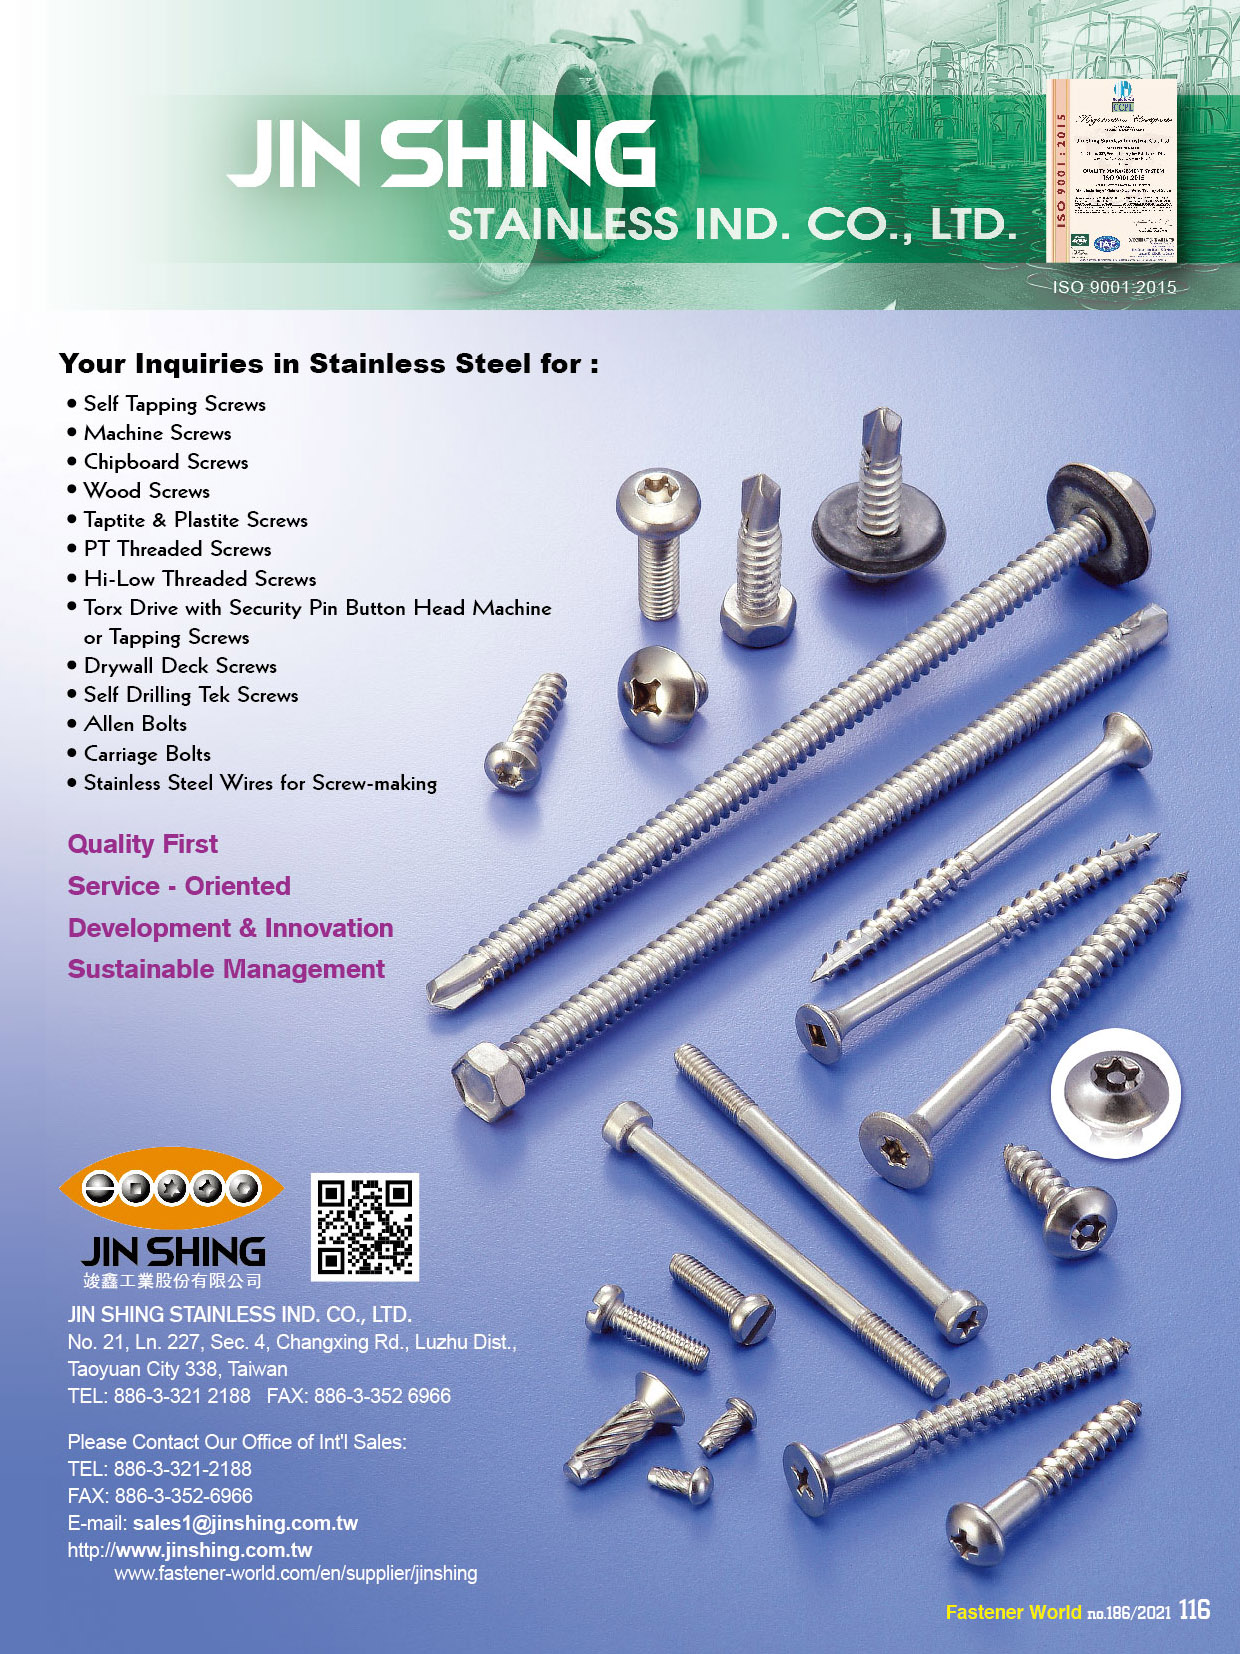 JIN SHING STAINLESS IND. CO., LTD. , Slef Tapping Screws, Machine Screws, Chipboard Screws, Wood Screws, Taptite & Plastite Screws, PT Threaded Screws, High-Low Threaded Screws, Torx Drive with Security Pin Button Head Machine or Tapping Screws, Drywall Deck Screws, Self-Drilling Tek Screws, Allen Bolts, Carriage Bolts, Stainless Steel Wires for Screw-making